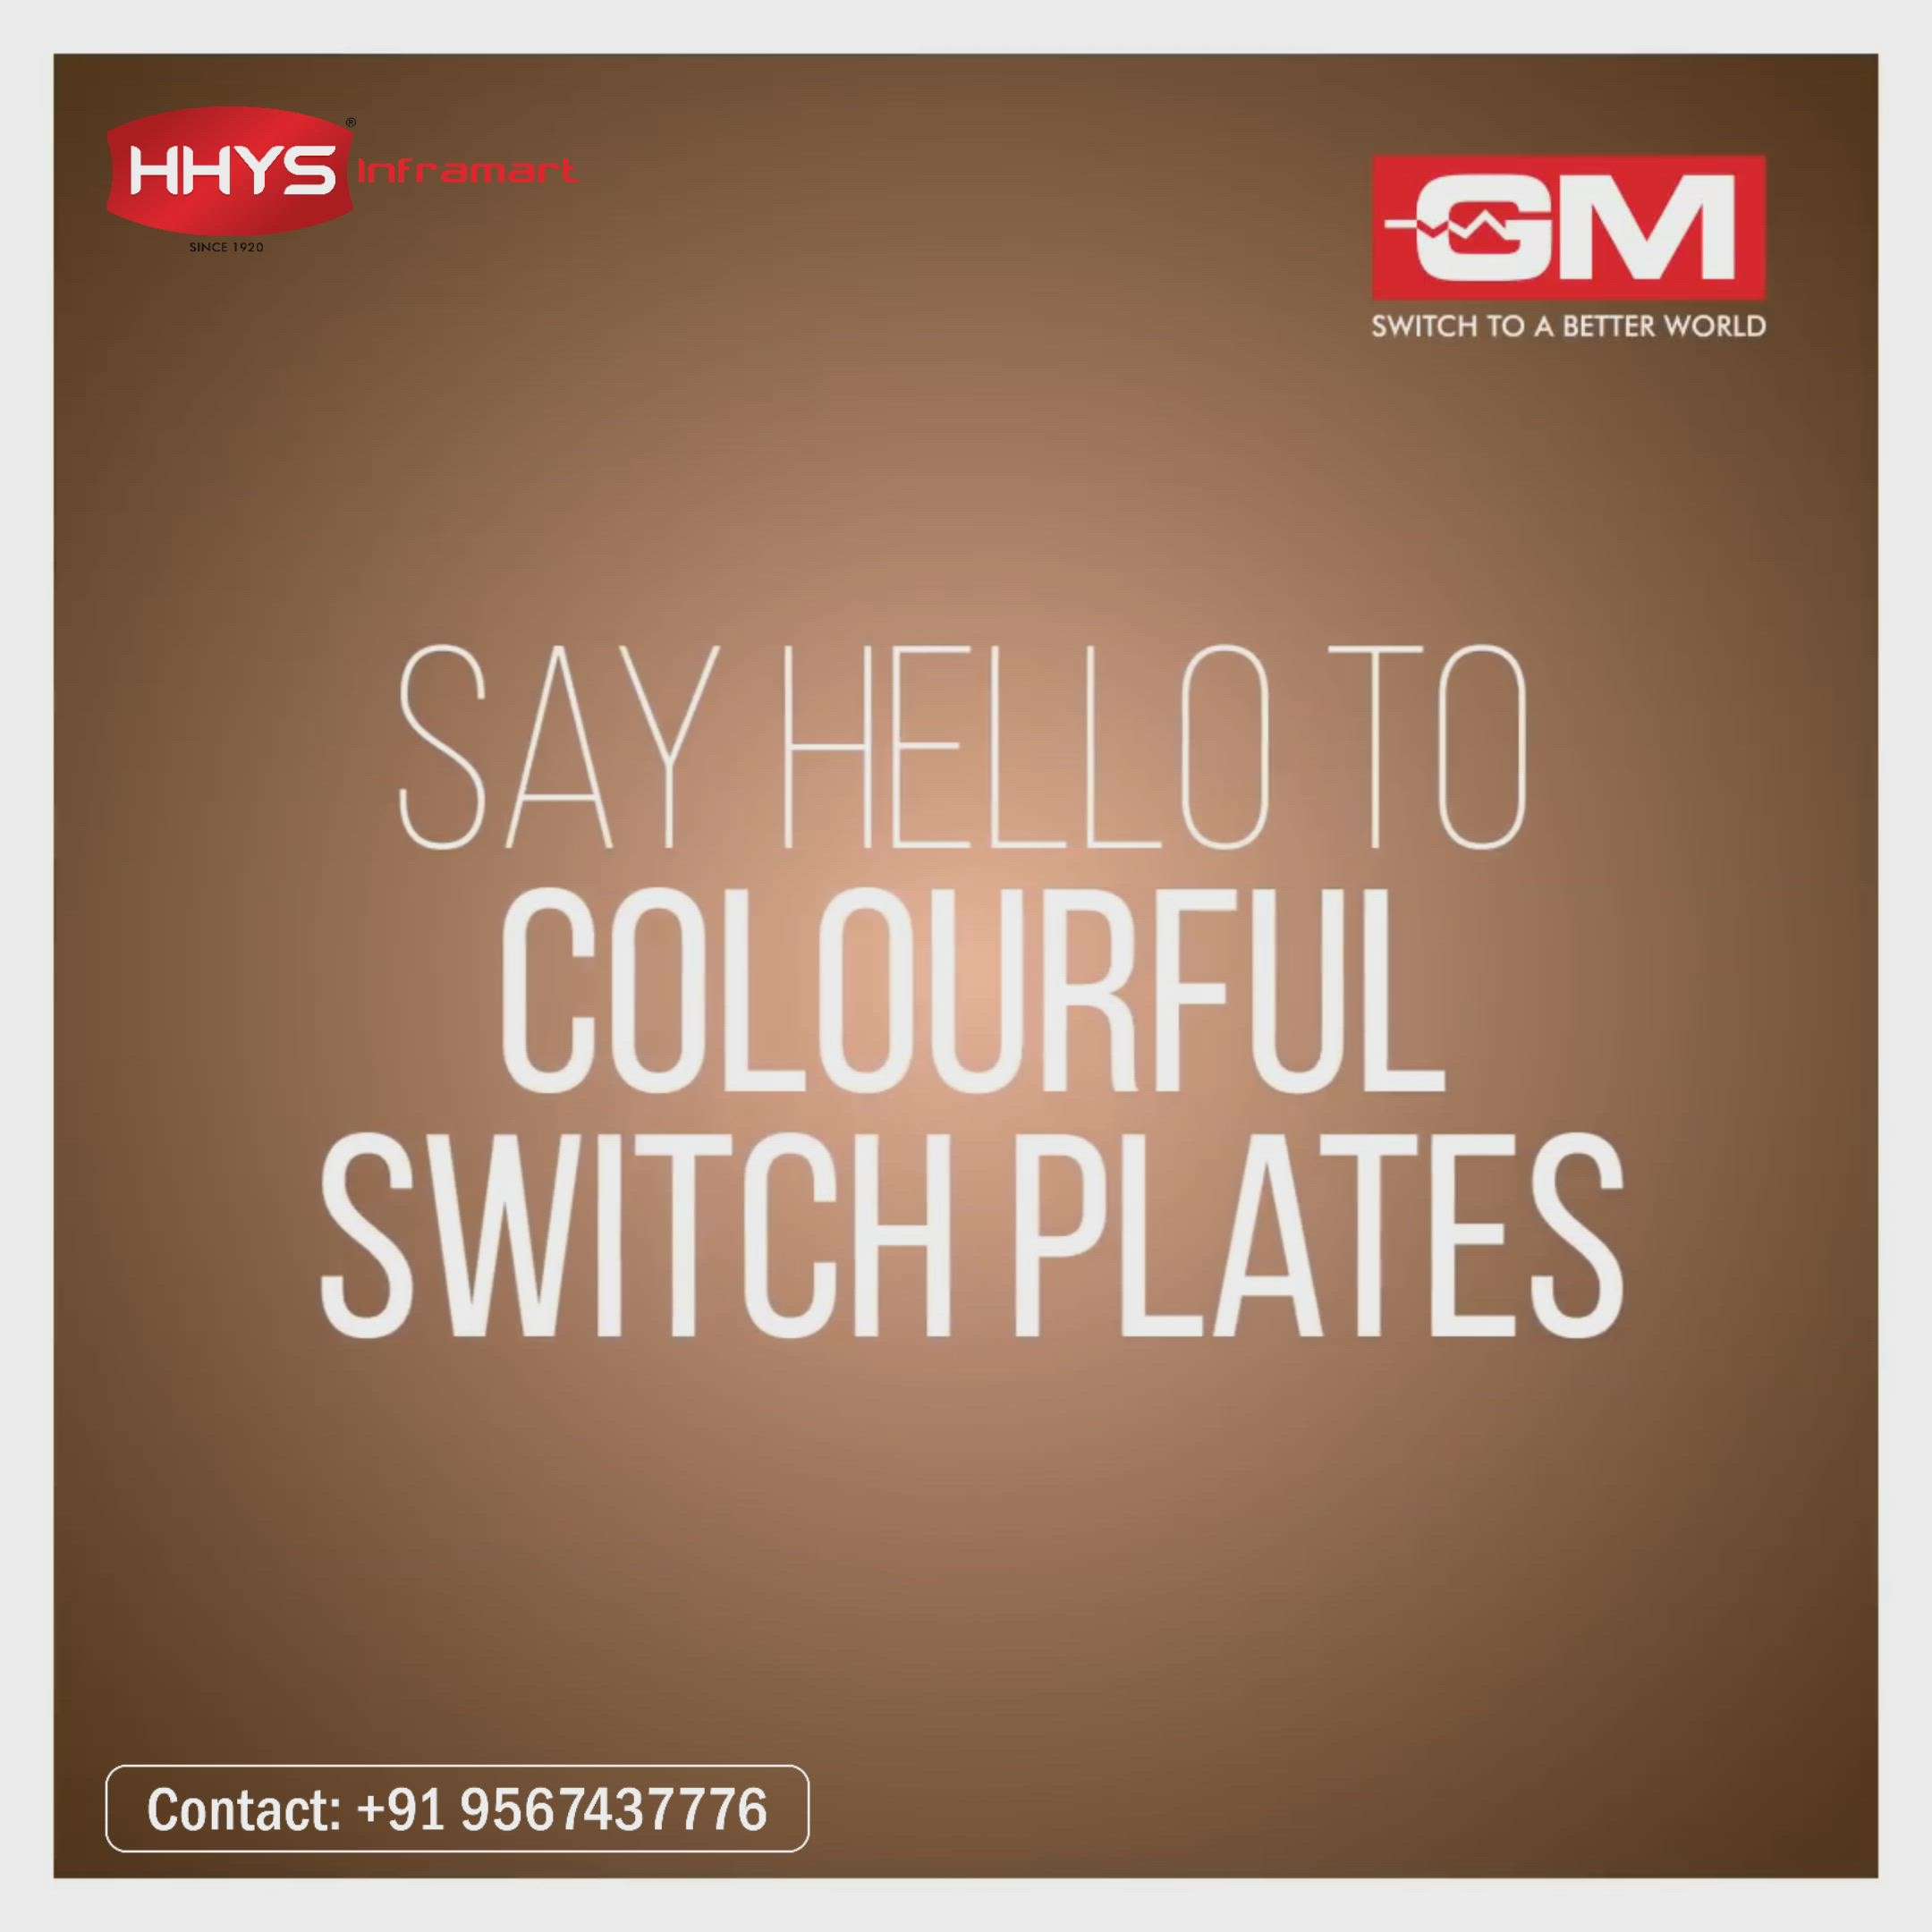 ✅ GM Modular Switches

GM Modular switches are the most appealing switches on the market , It's time to make the leap to a more colourful lifestyle.

Visit our HHYS Inframart showroom in Kayamkulam for more details.

𝖧𝖧𝖸𝖲 𝖨𝗇𝖿𝗋𝖺𝗆𝖺𝗋𝗍
𝖬𝗎𝗄𝗄𝖺𝗏𝖺𝗅𝖺 𝖩𝗇 , 𝖪𝖺𝗒𝖺𝗆𝗄𝗎𝗅𝖺𝗆
𝖠𝗅𝖾𝗉𝗉𝖾𝗒 - 690502

Call us for more Details :
+91 95674 37776.

✉️ info@hhys.in

🌐 https://hhys.in/

✔️ Whatsapp Now : https://wa.me/+919567437776

#hhys #hhysinframart #buildingmaterials #CrystallineSwitches  #GMModular #SwitchToABetterWorld